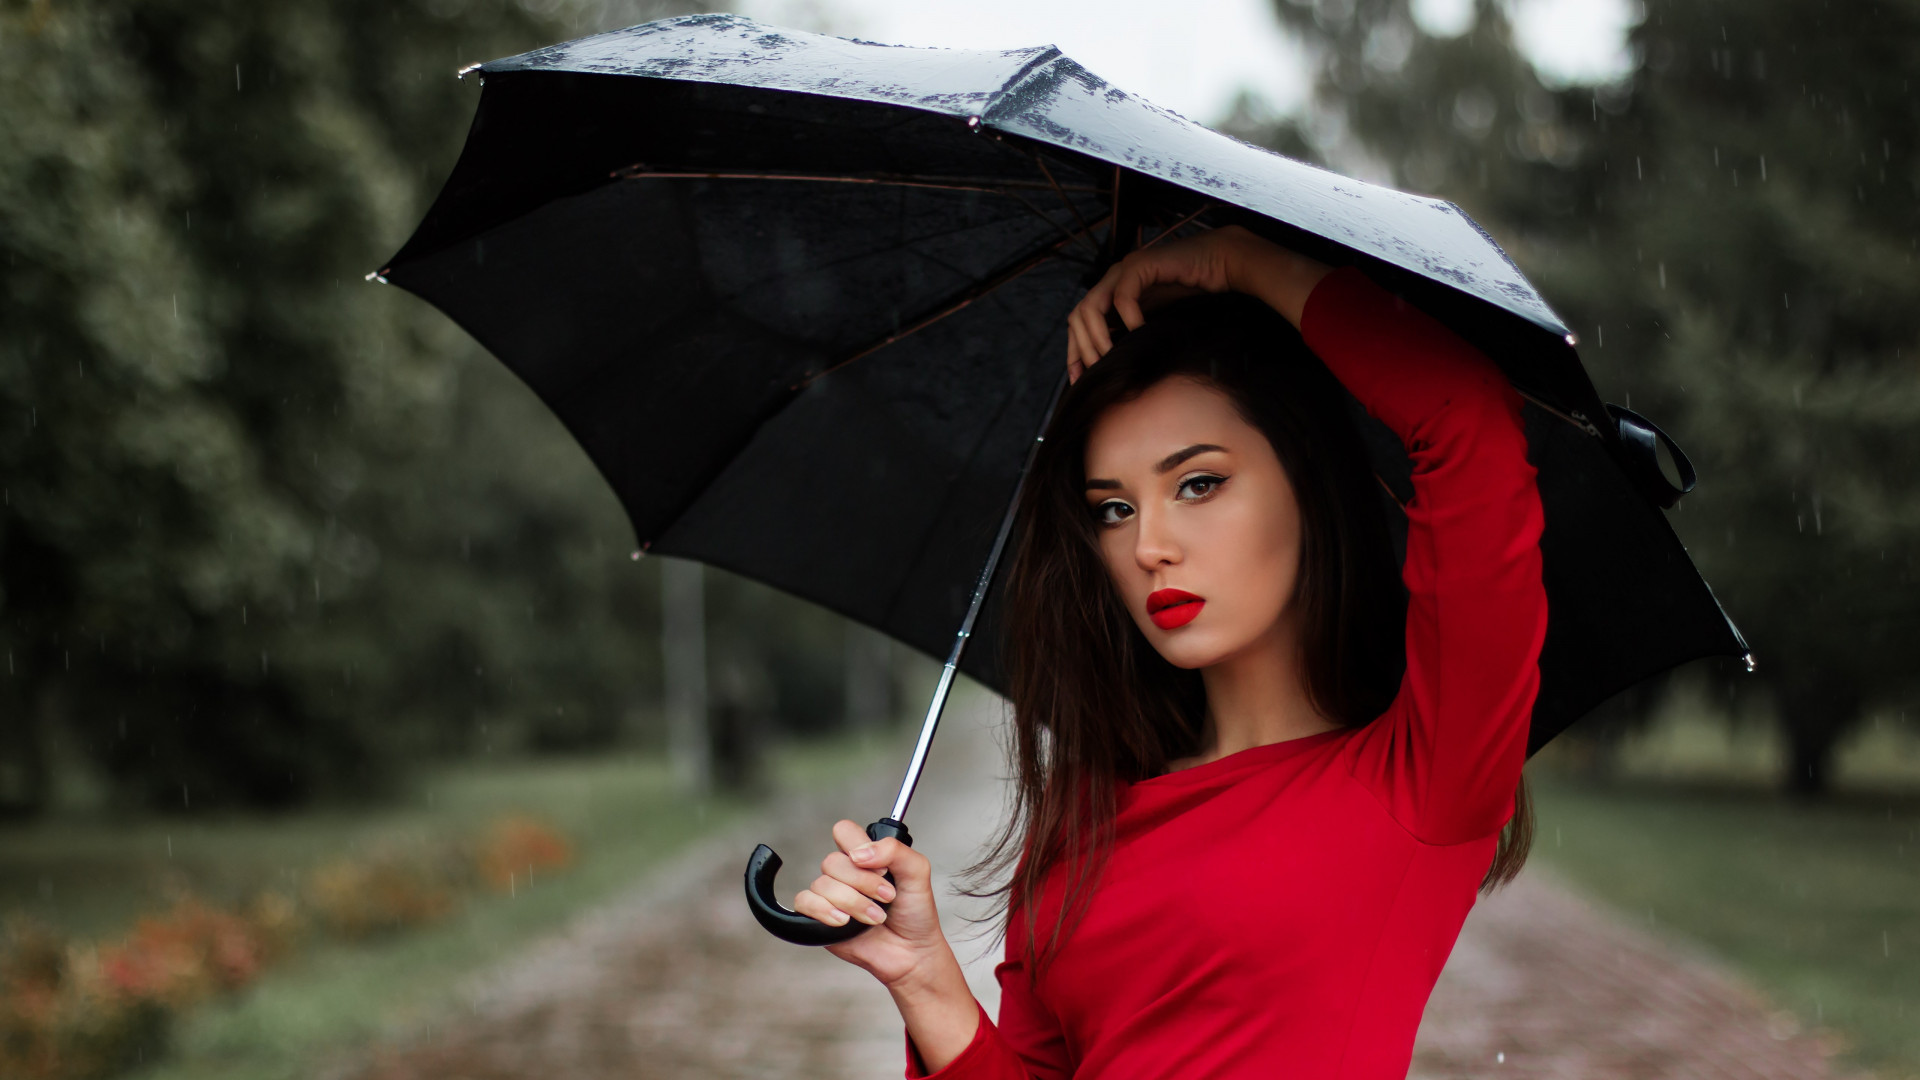 Beauitful girl in a rainy day wallpaper 1920x1080